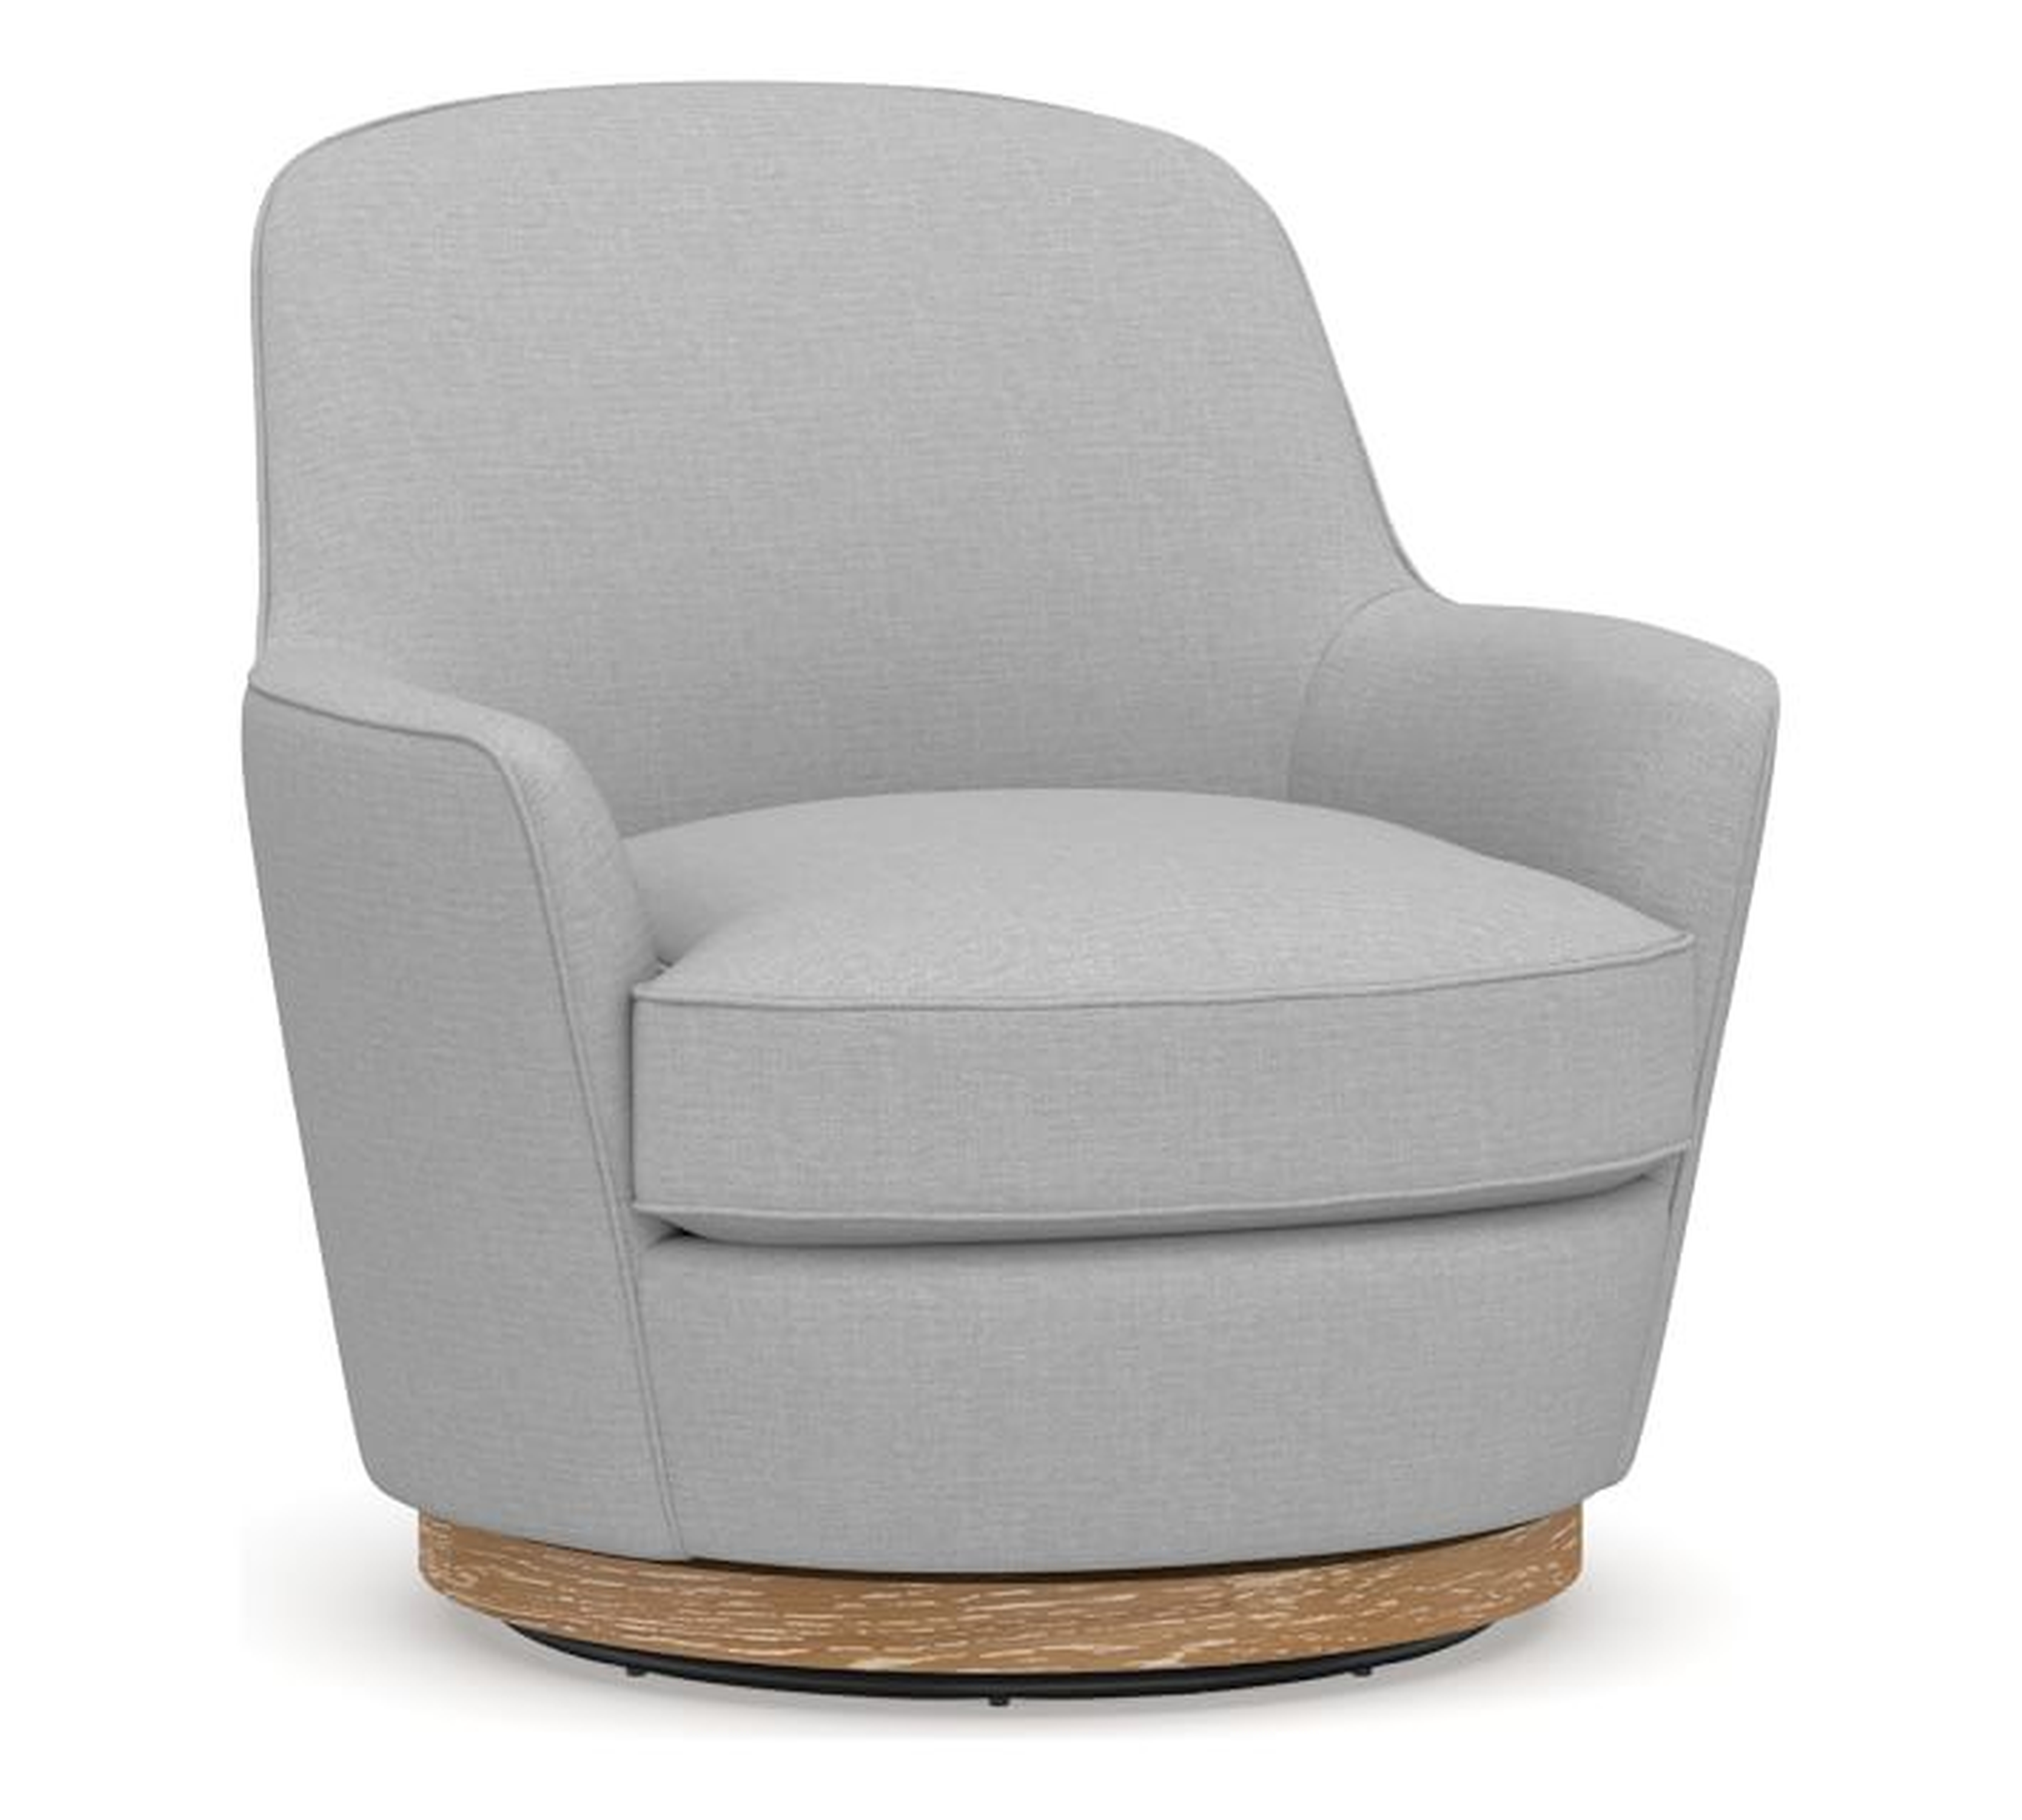 Larkin Upholstered Swivel Armchair, Polyester Wrapped Cushions, Brushed Crossweave Light Gray - Pottery Barn